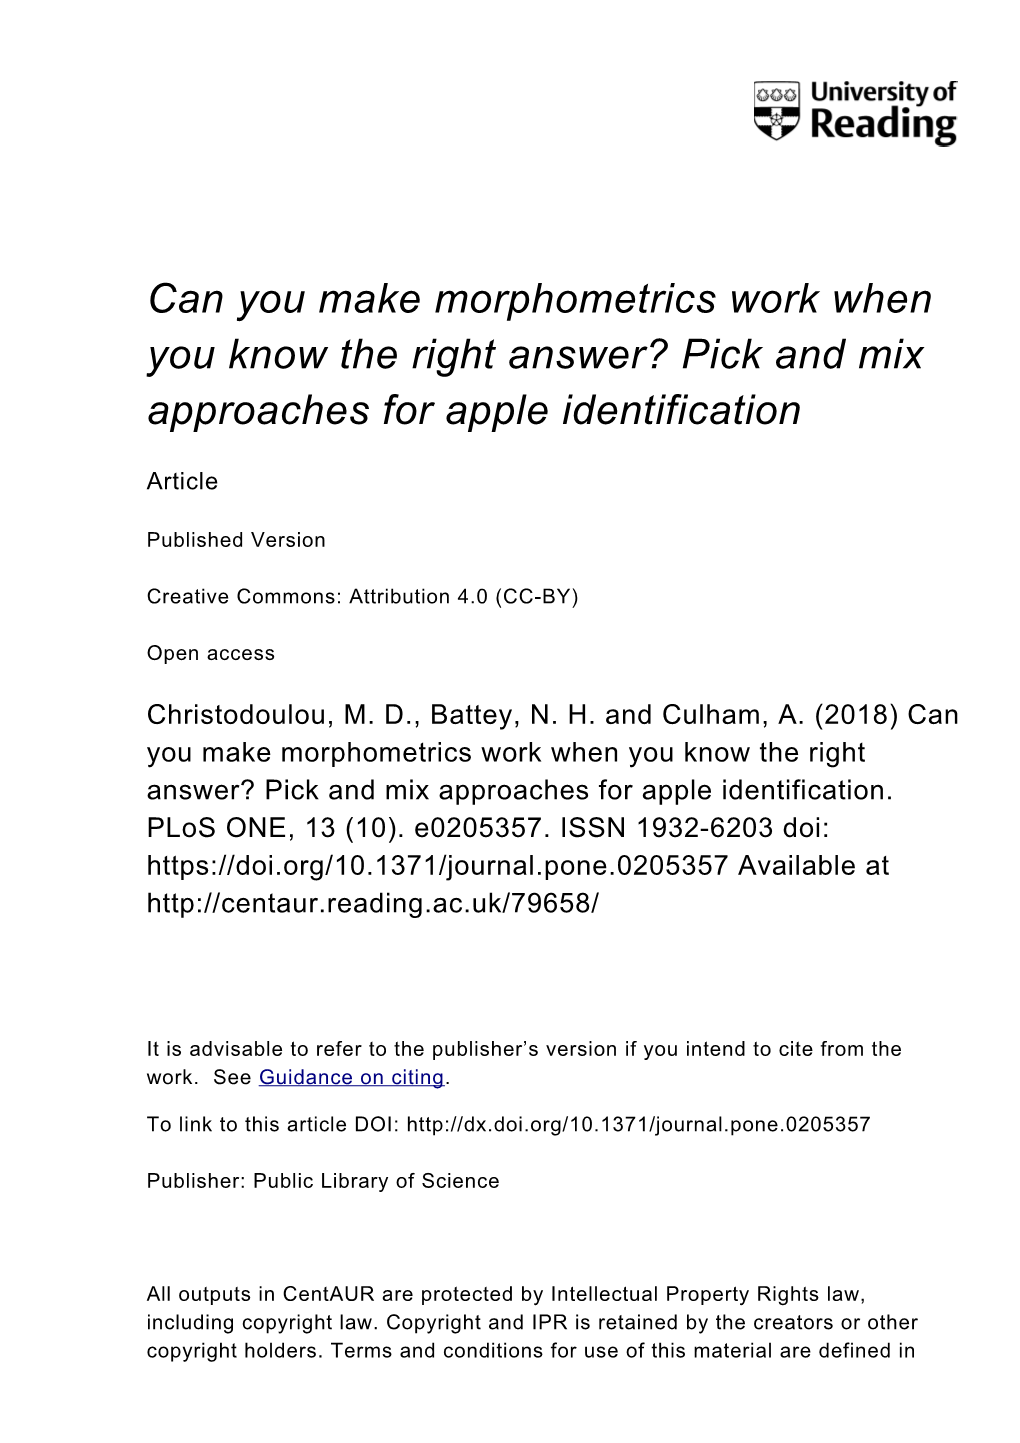 Can You Make Morphometrics Work When You Know the Right Answer? Pick and Mix Approaches for Apple Identification